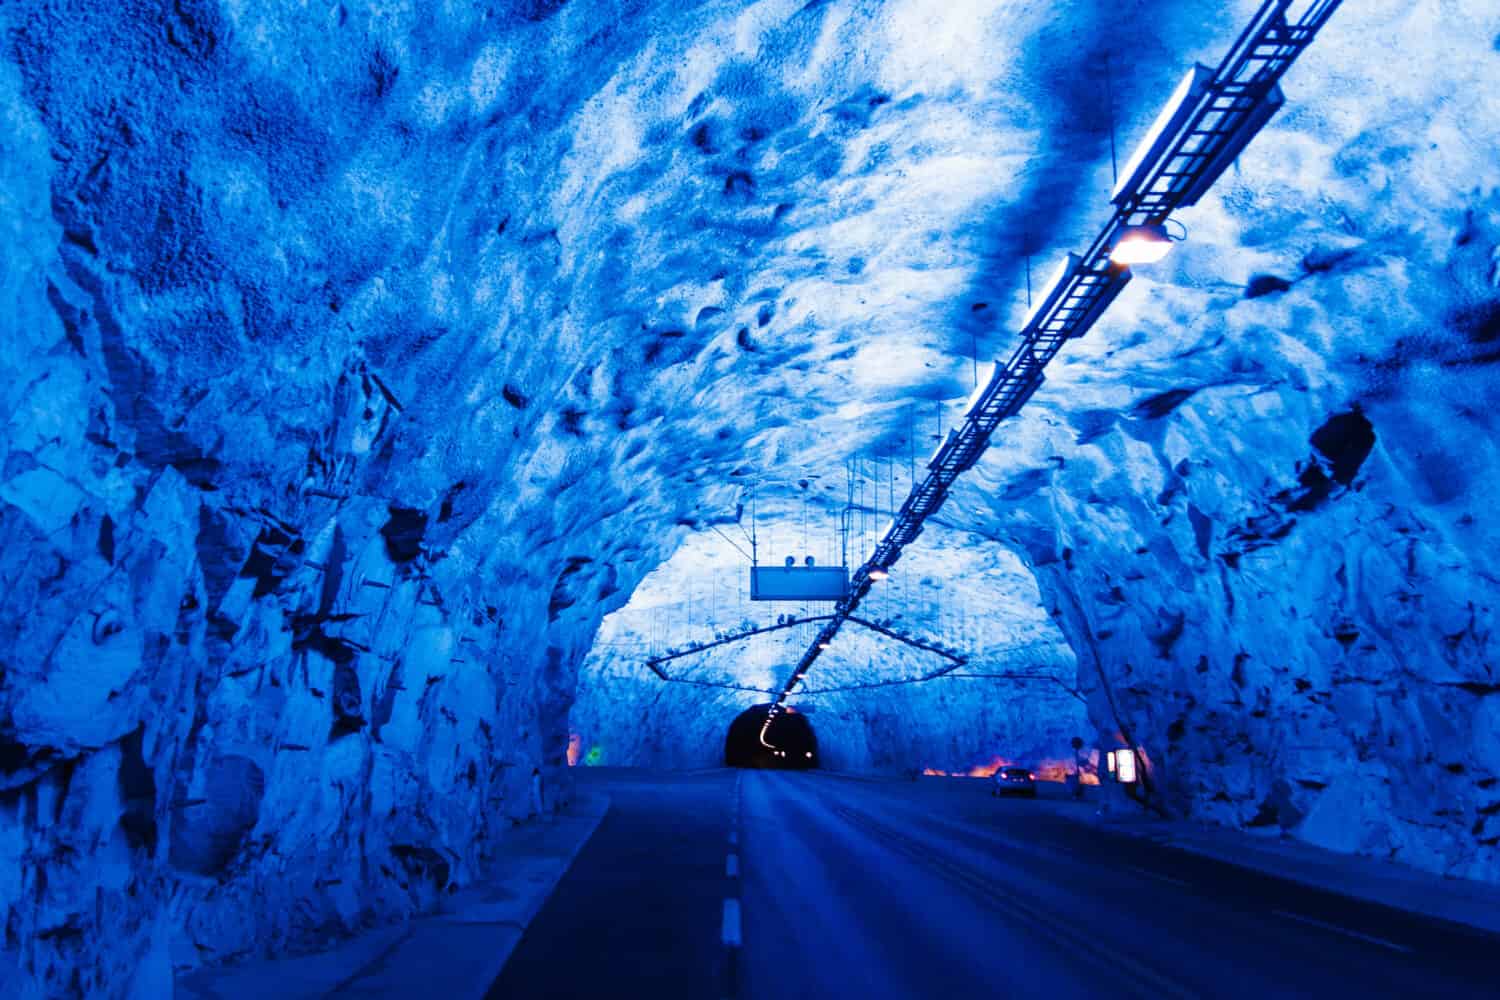 Lærdal Tunnel in Norway